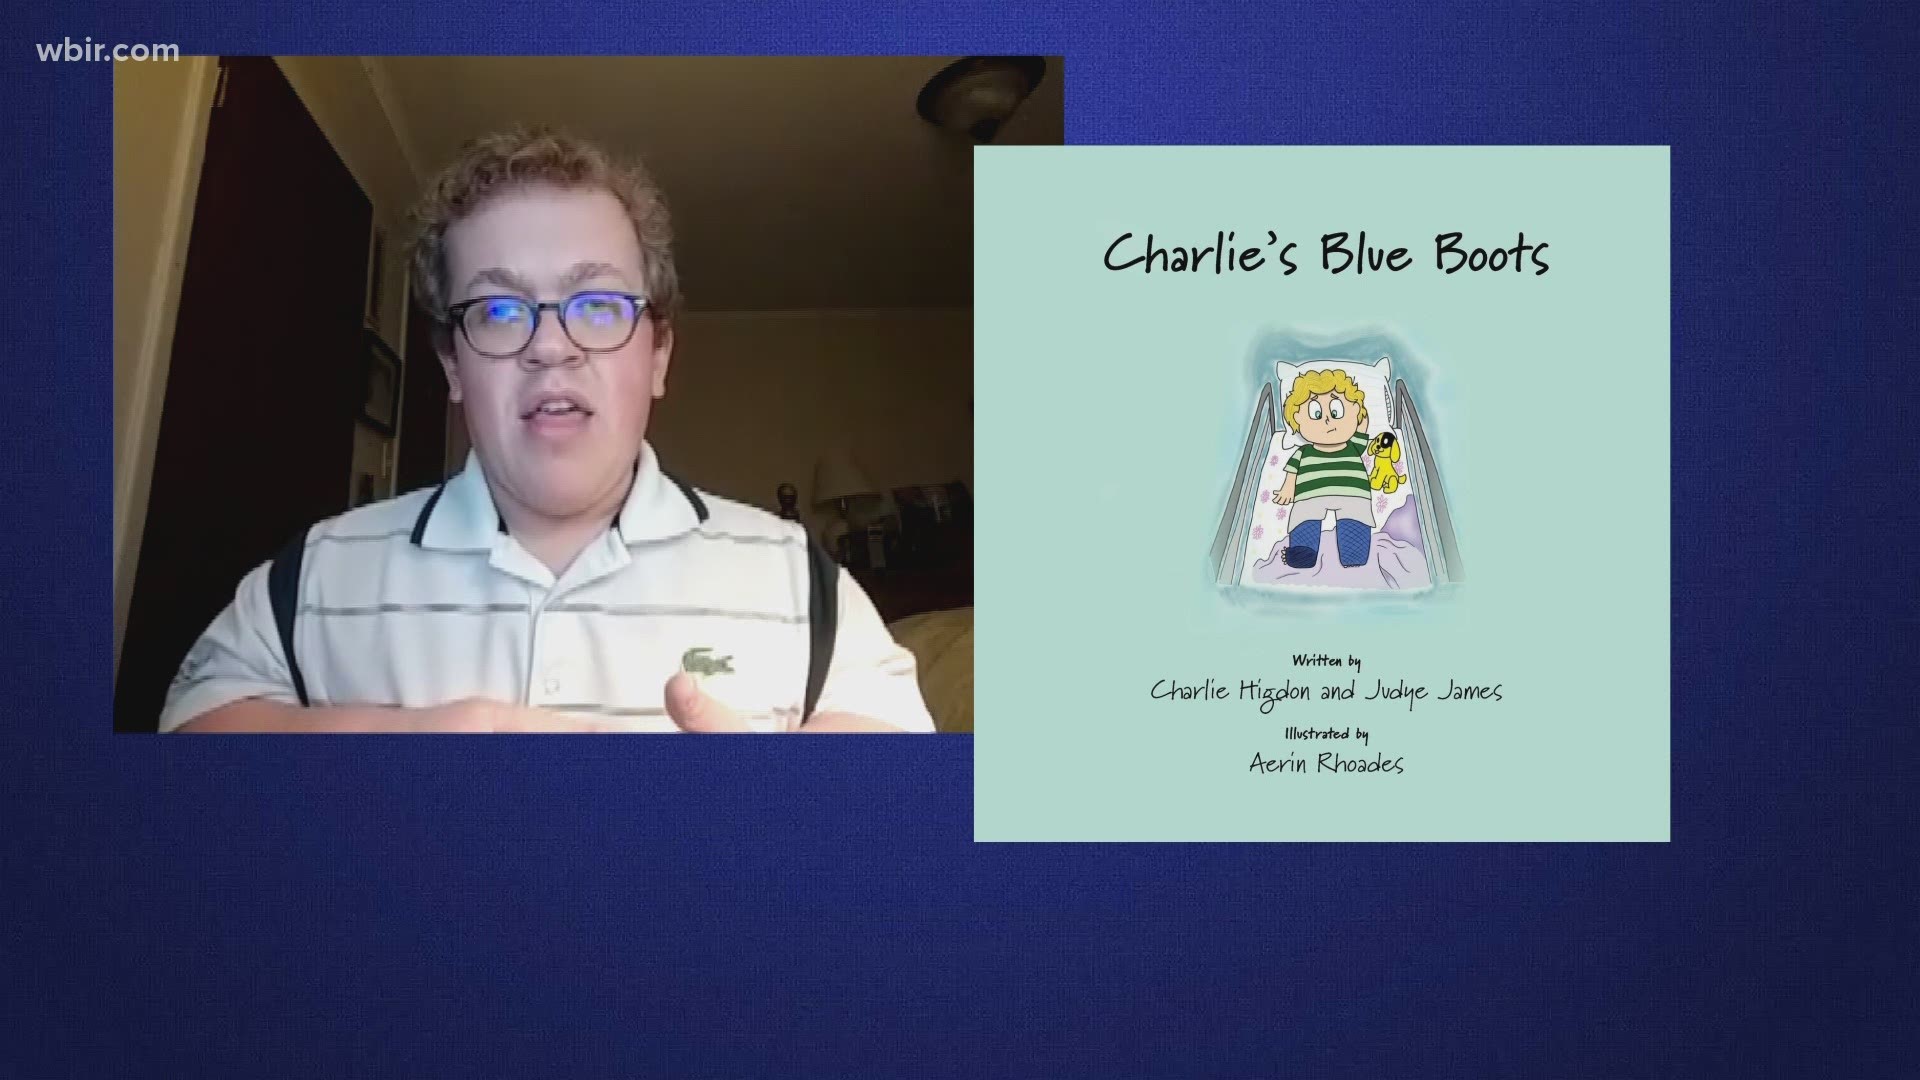 'Charlie's Blue Boots' is based on the true story of a Little Person who lives in Knoxville